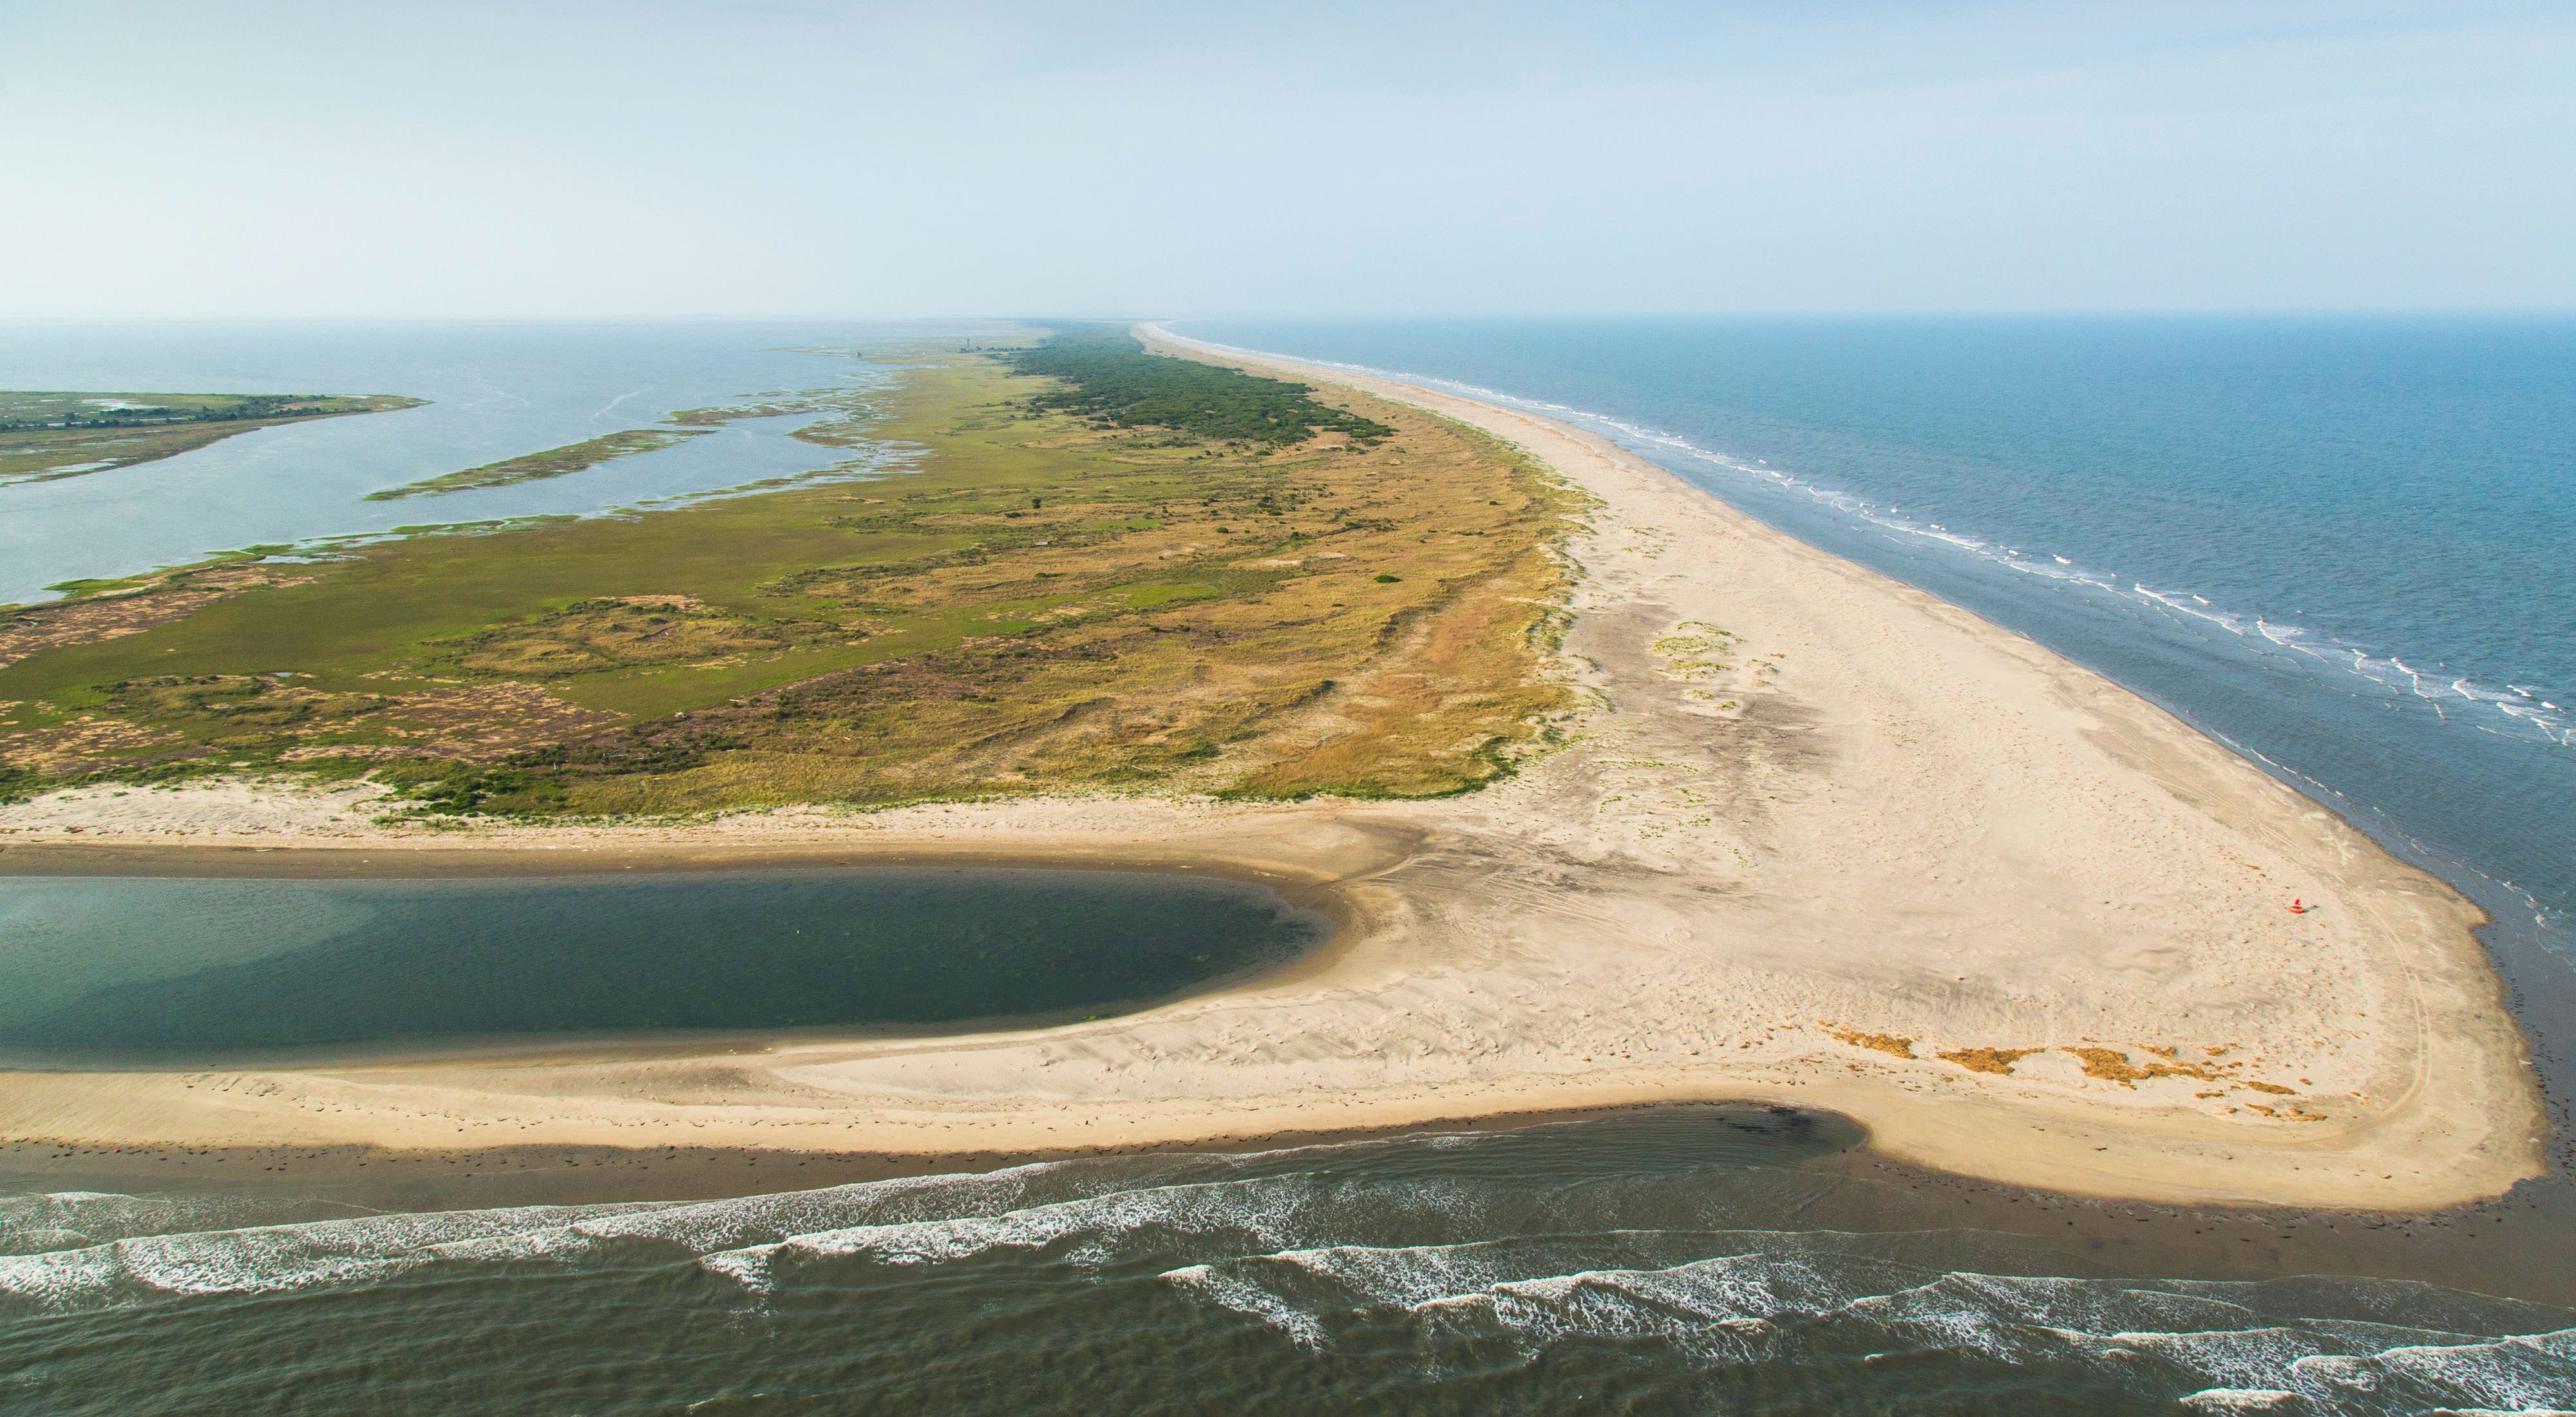 Aerial view of Hog Island, Virginia. The Atlantic Ocean laps against a wide stretch of sand. The back of the island is covered in low scrub and a stand of coastal forest.